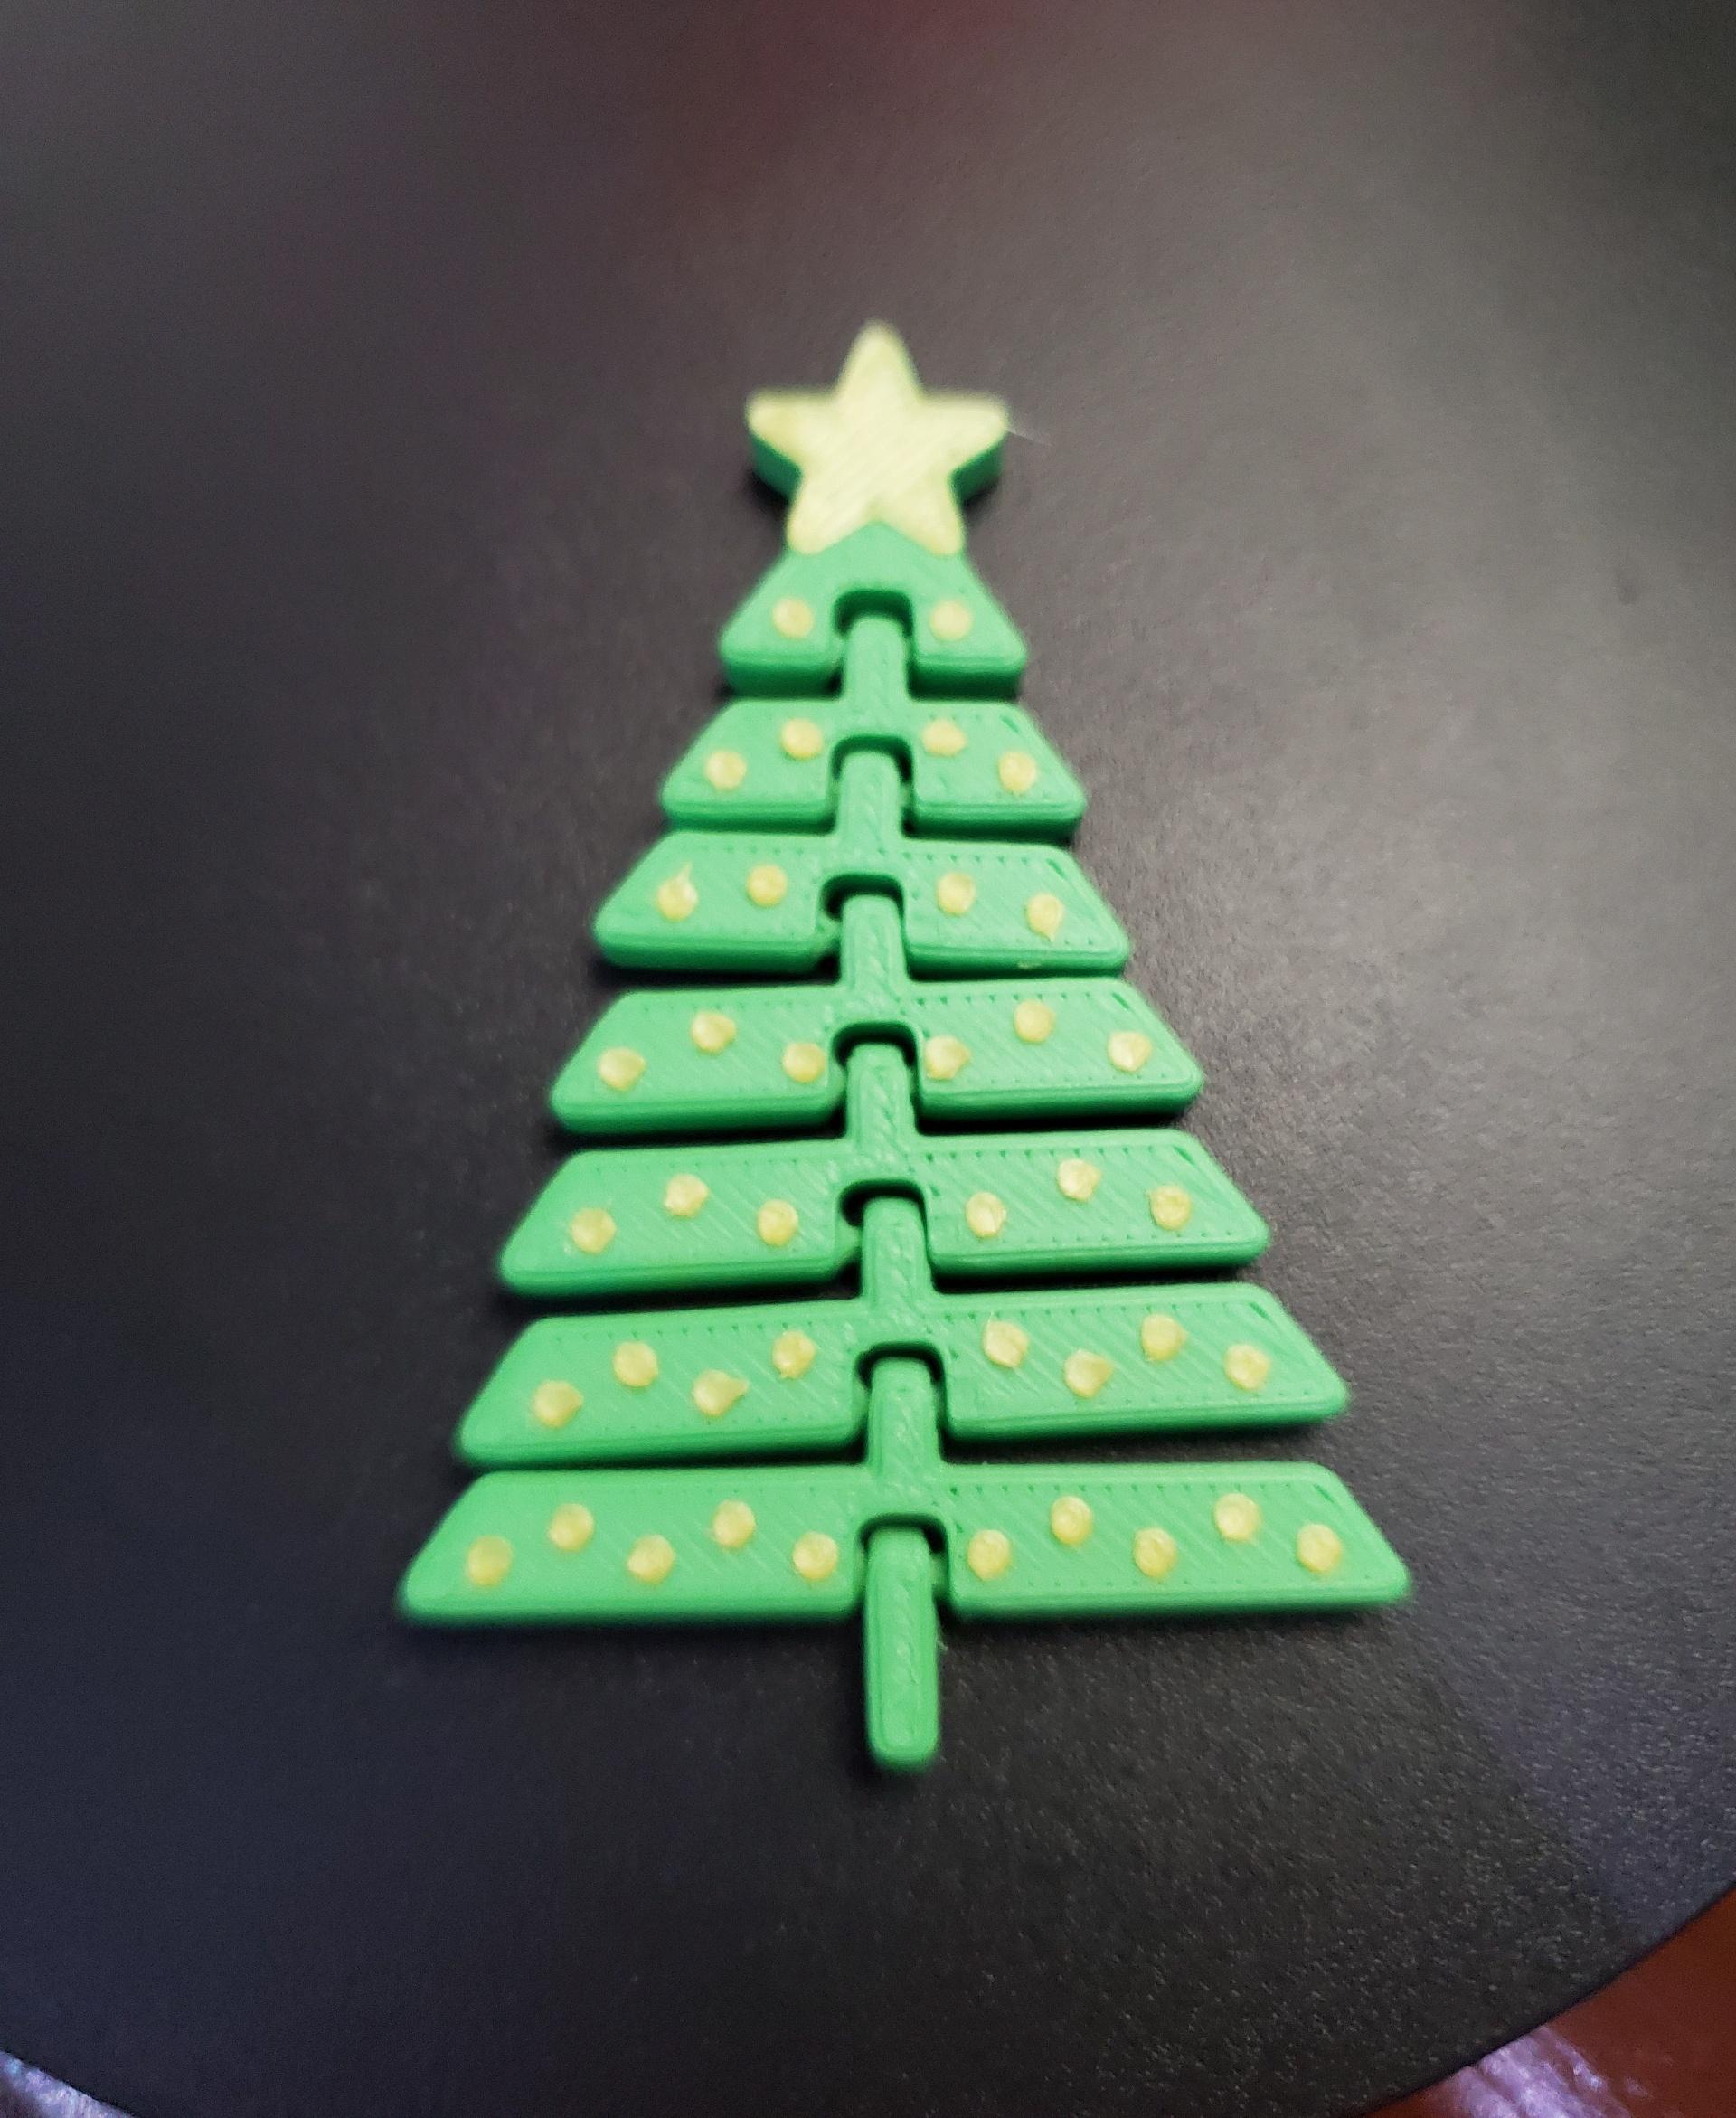 Articulated Christmas Tree with Star and Ornaments - Print in place fidget toys - 3mf - polyterra forest green - 3d model